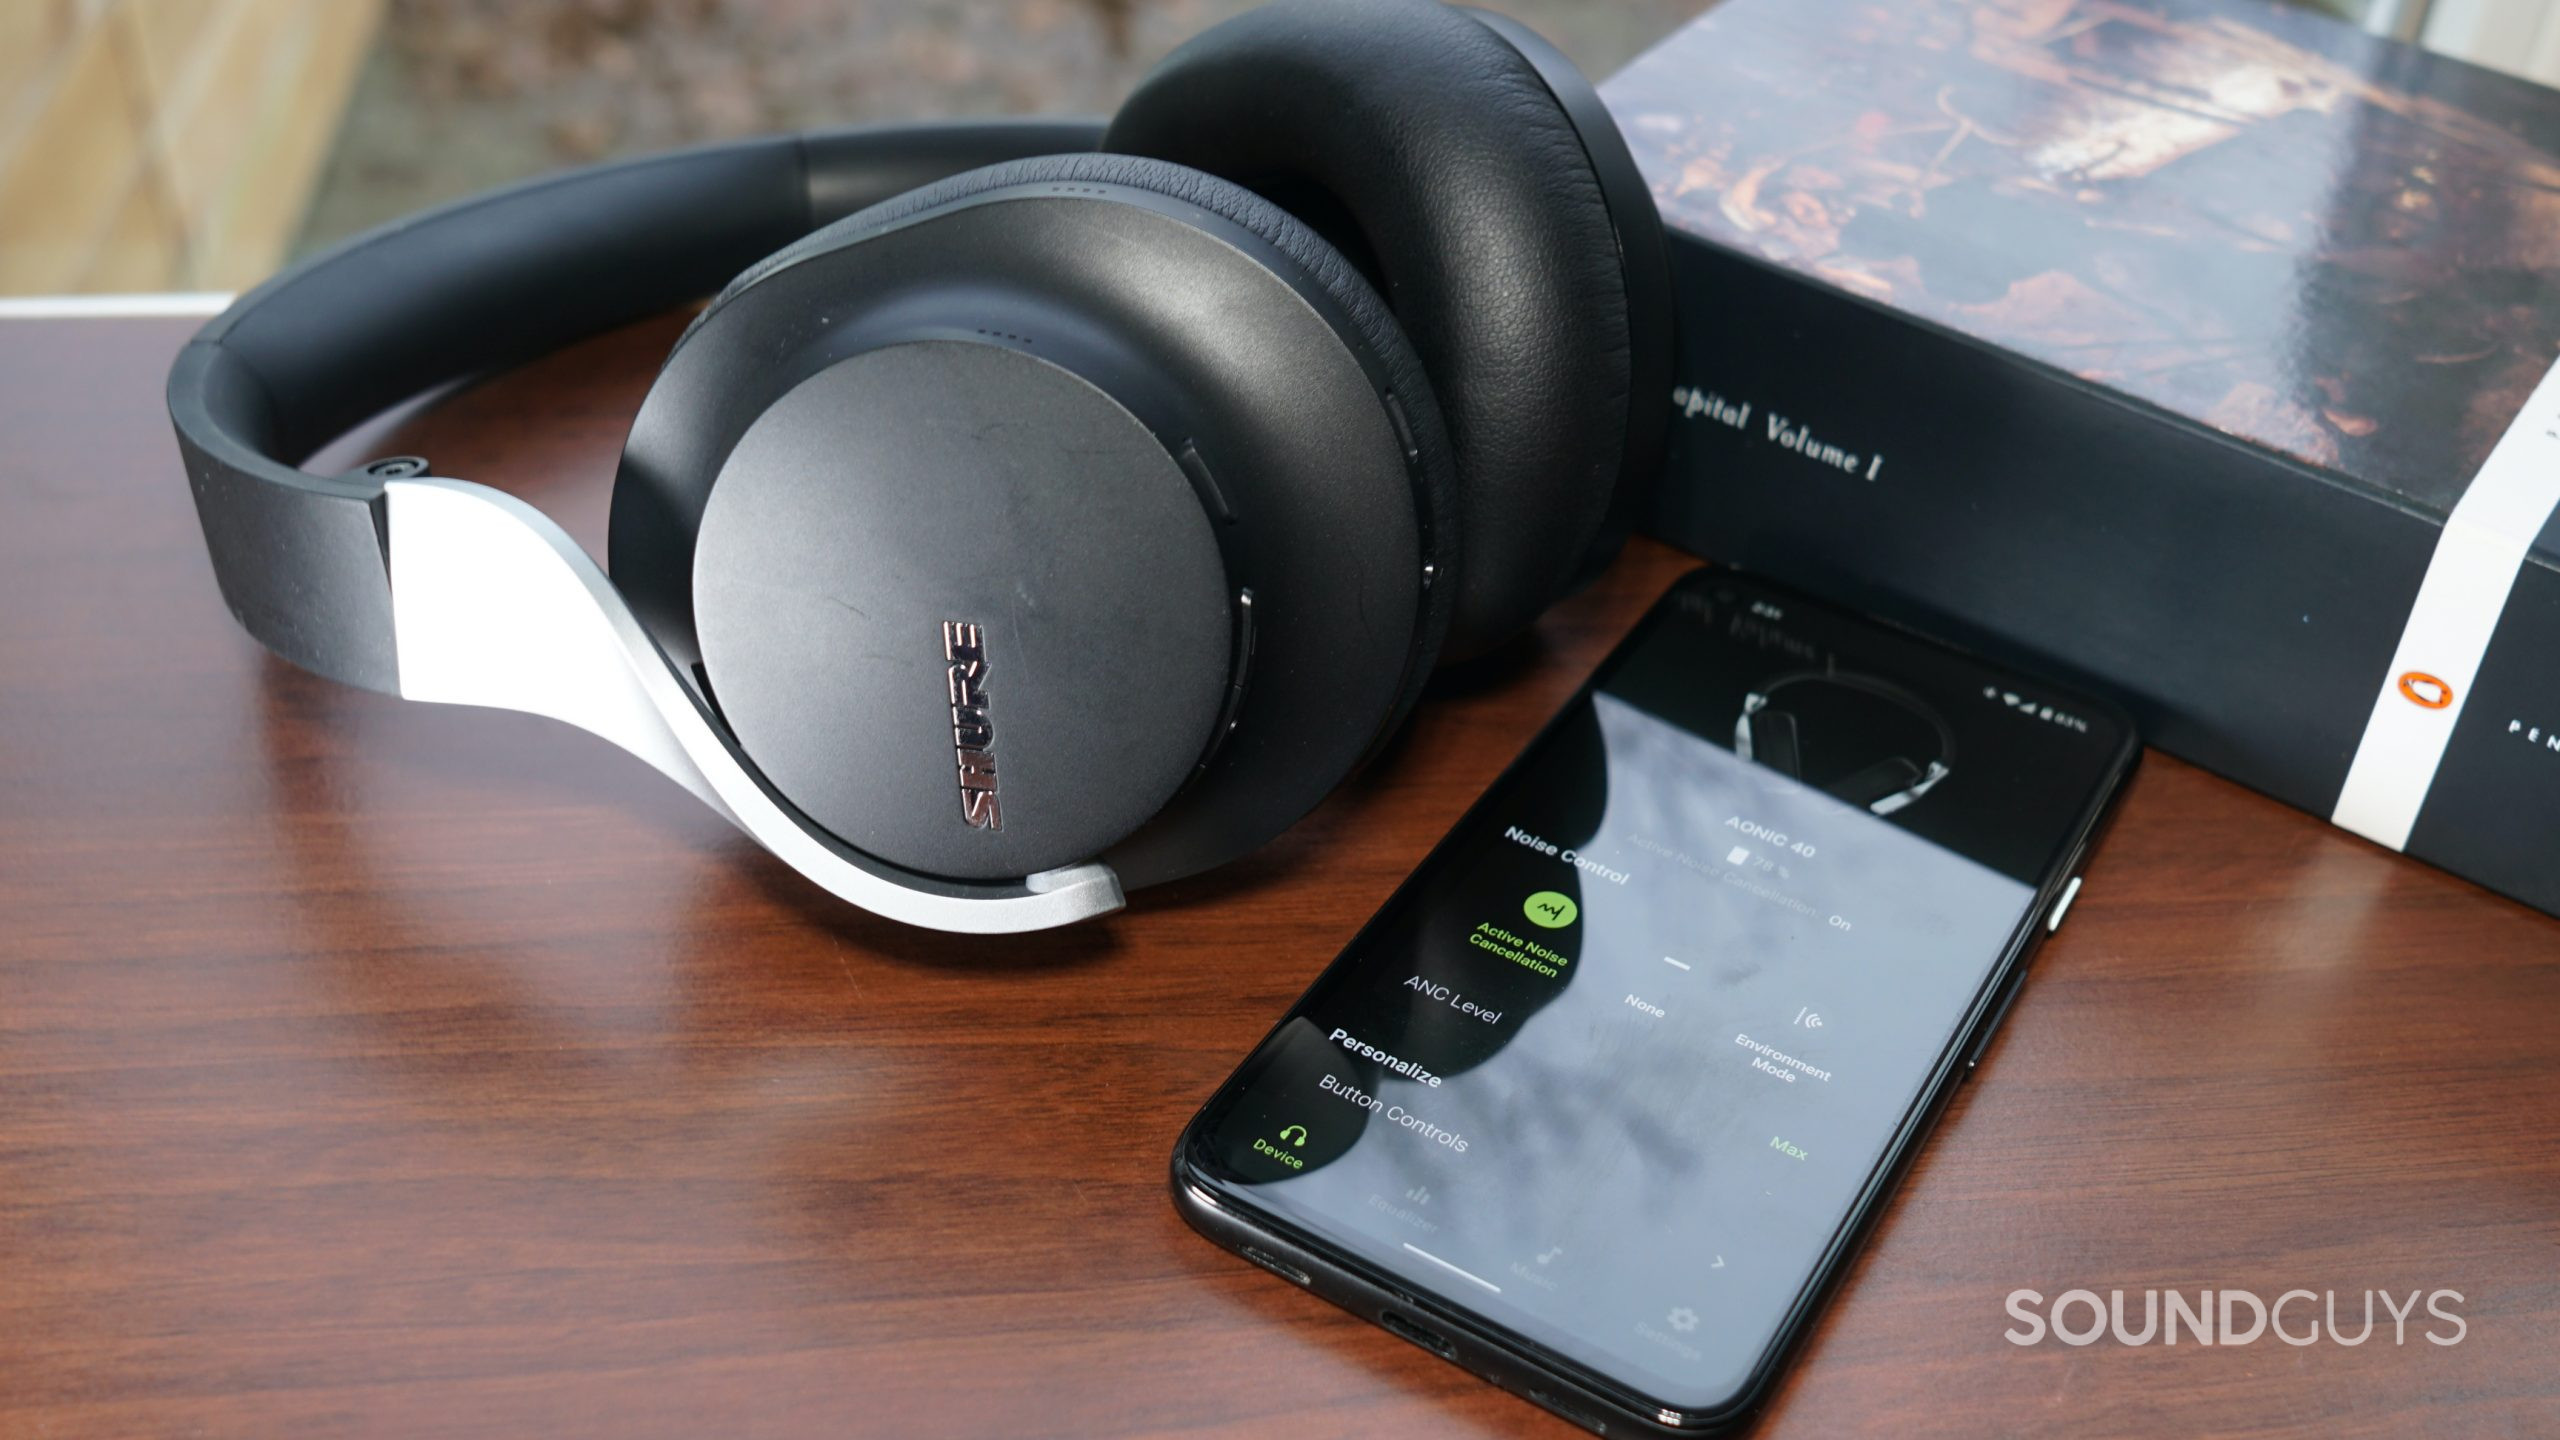 The Shure AONIC 40 bluetooth headphones lay on a wooden table next to a Google Pixel 4a running the Shure Plus Play app and a copy of volume 1 of Capital by Karl Marx.